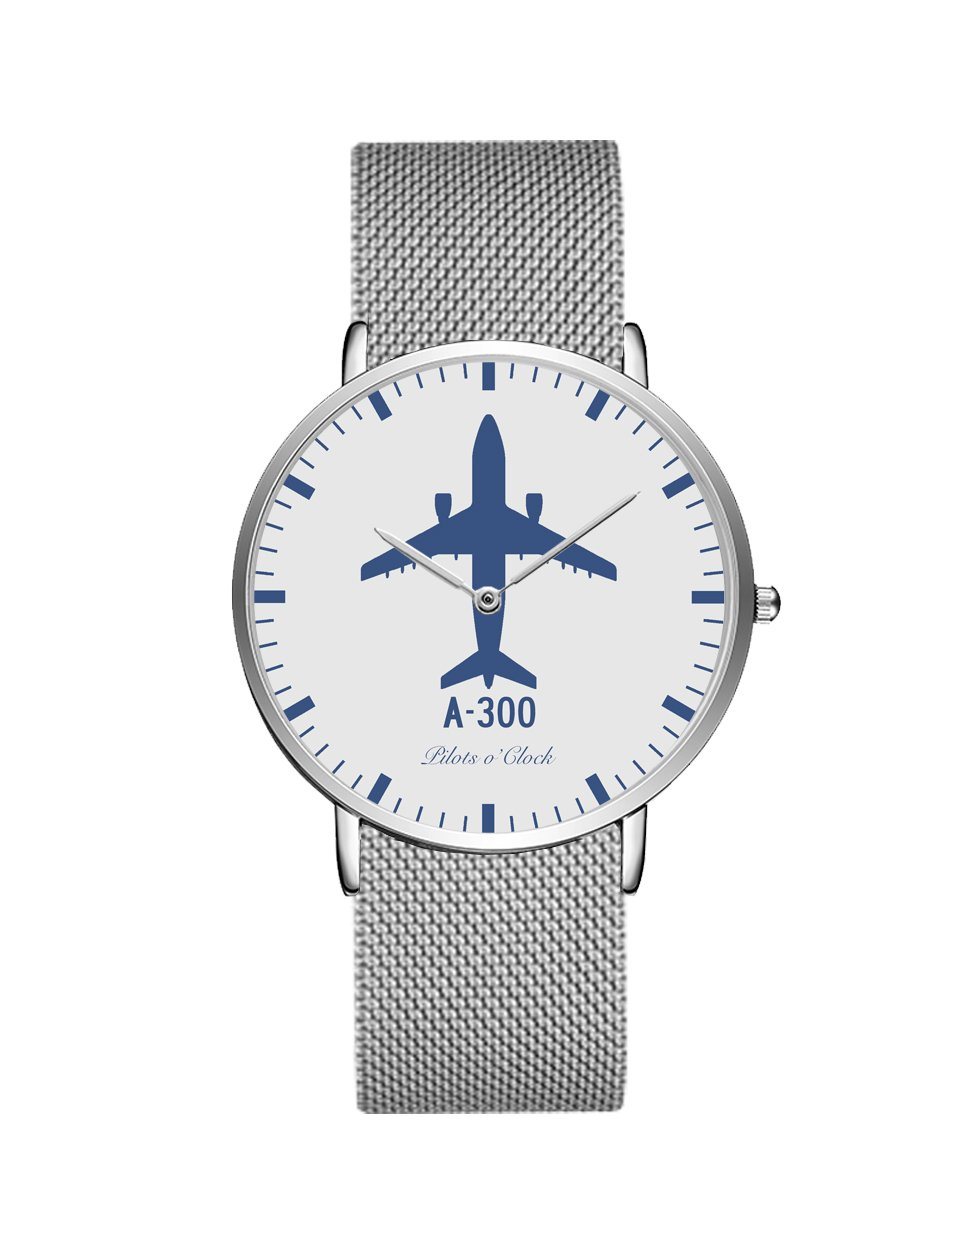 Airbus A300 Stainless Steel Strap Watches Pilot Eyes Store Silver & Silver Stainless Steel Strap 